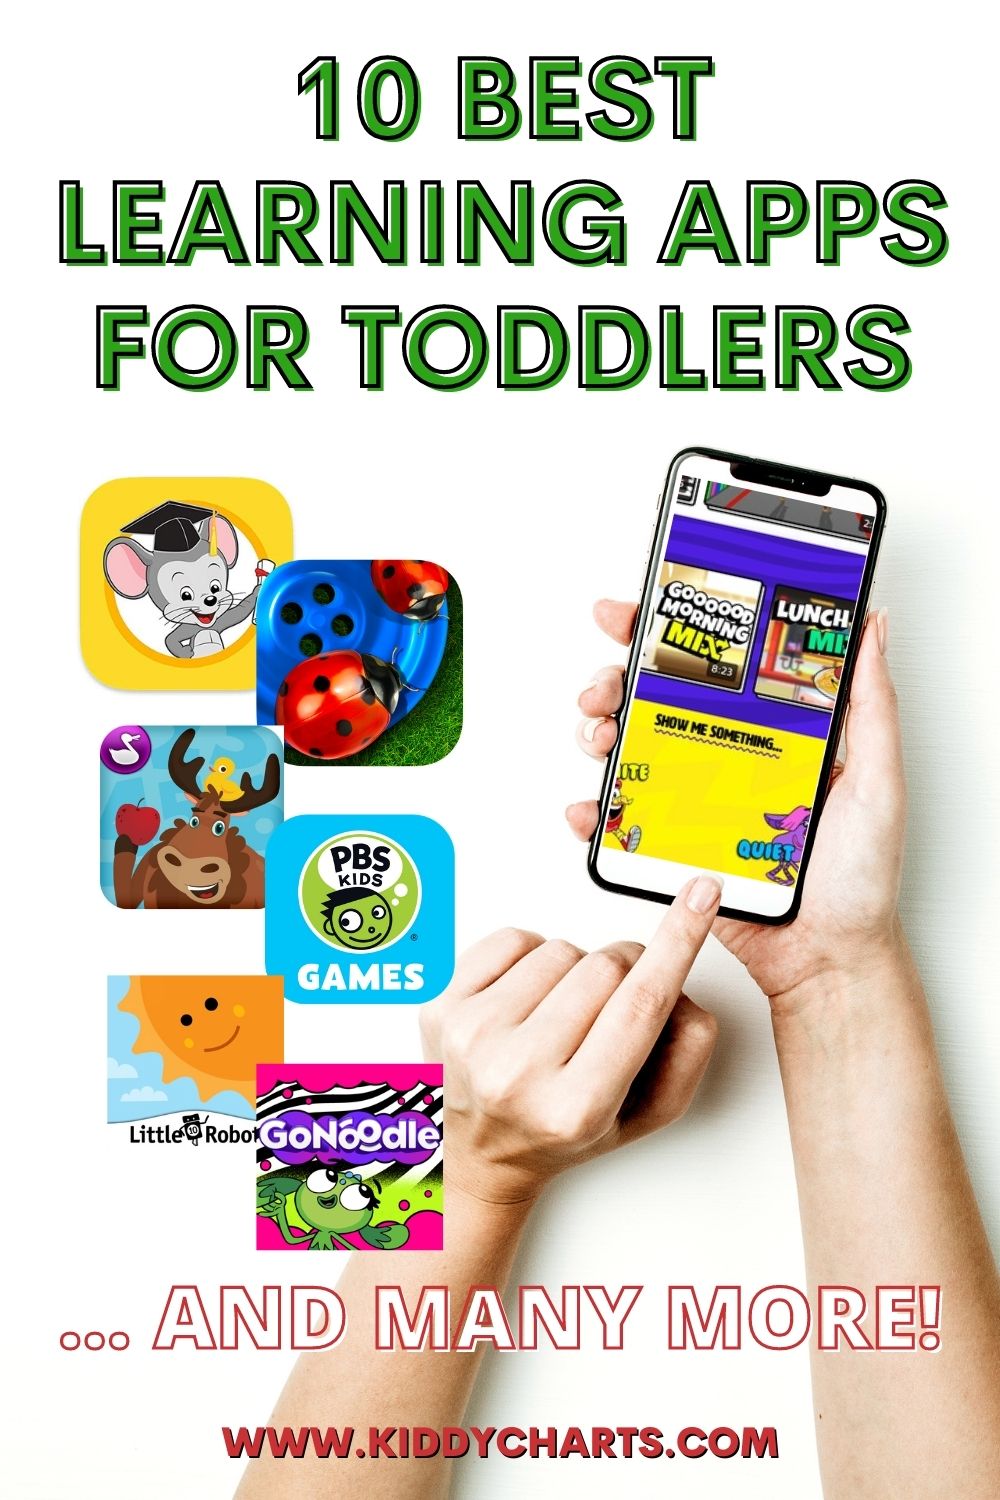 10 best learning apps for toddlers